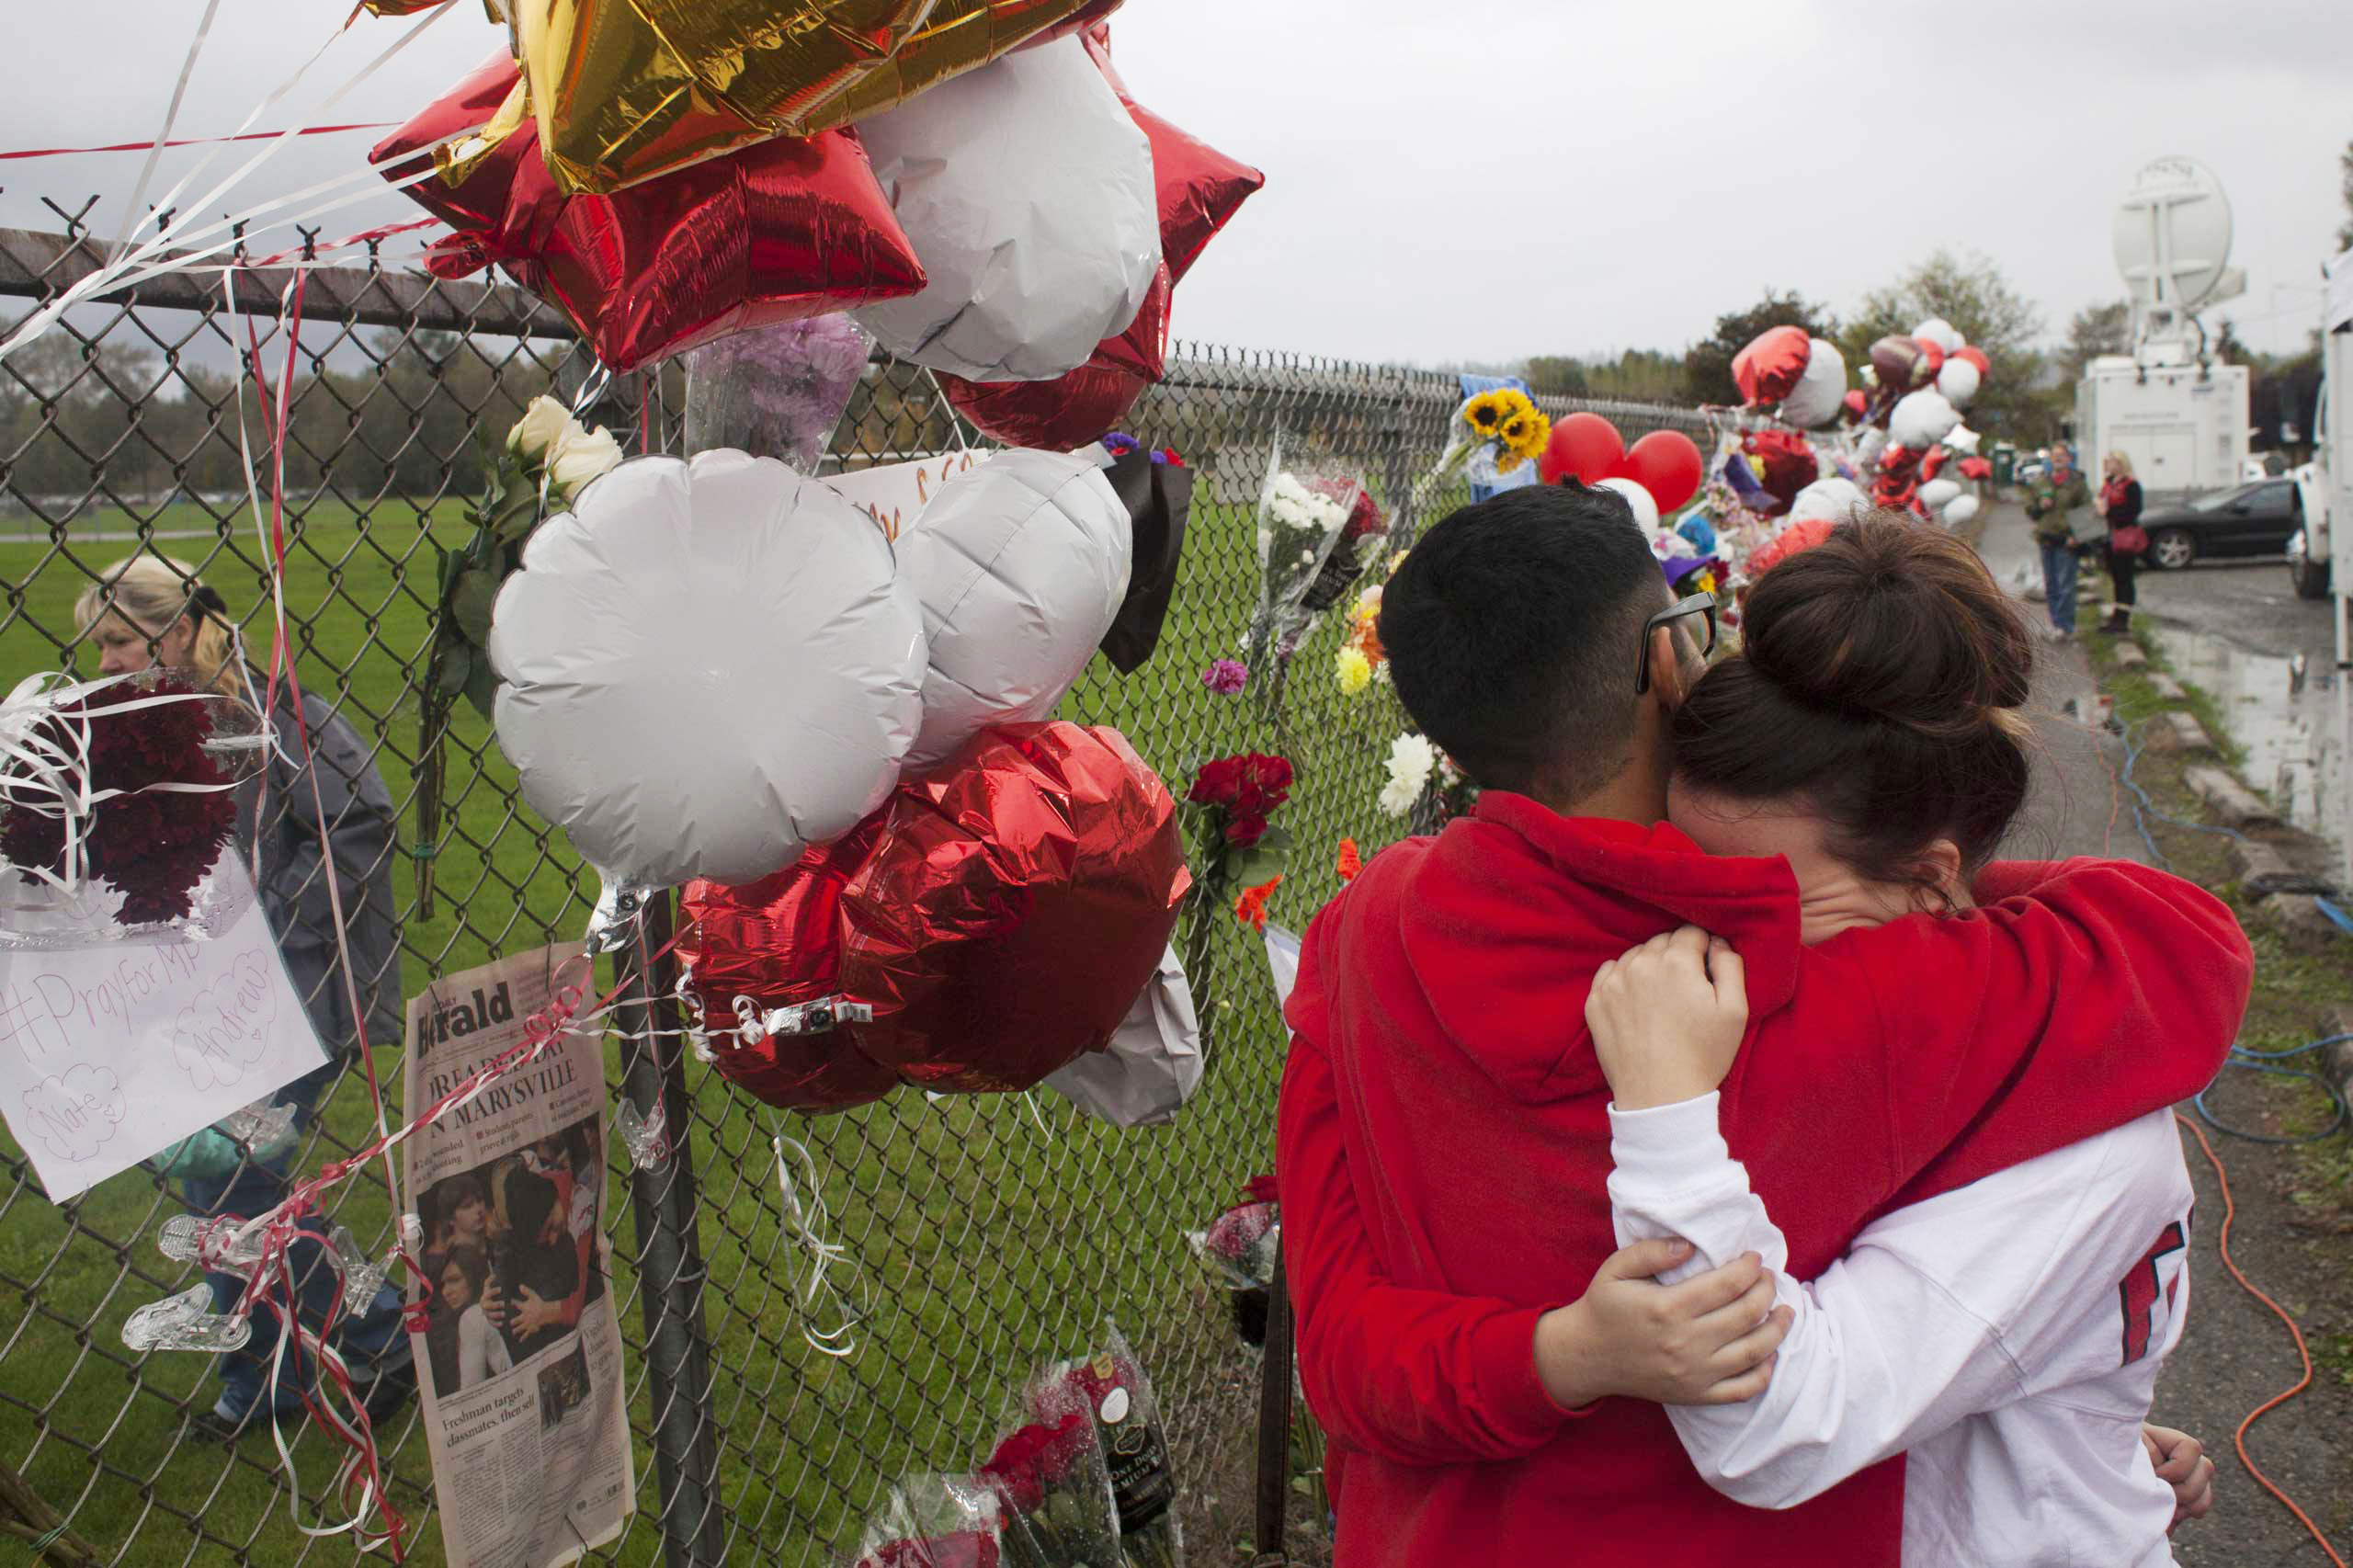 Students grieve beside a makeshift memorial at Marysville-Pilchuck High School in Marysville, Wash. (David Ryder—Getty Images)